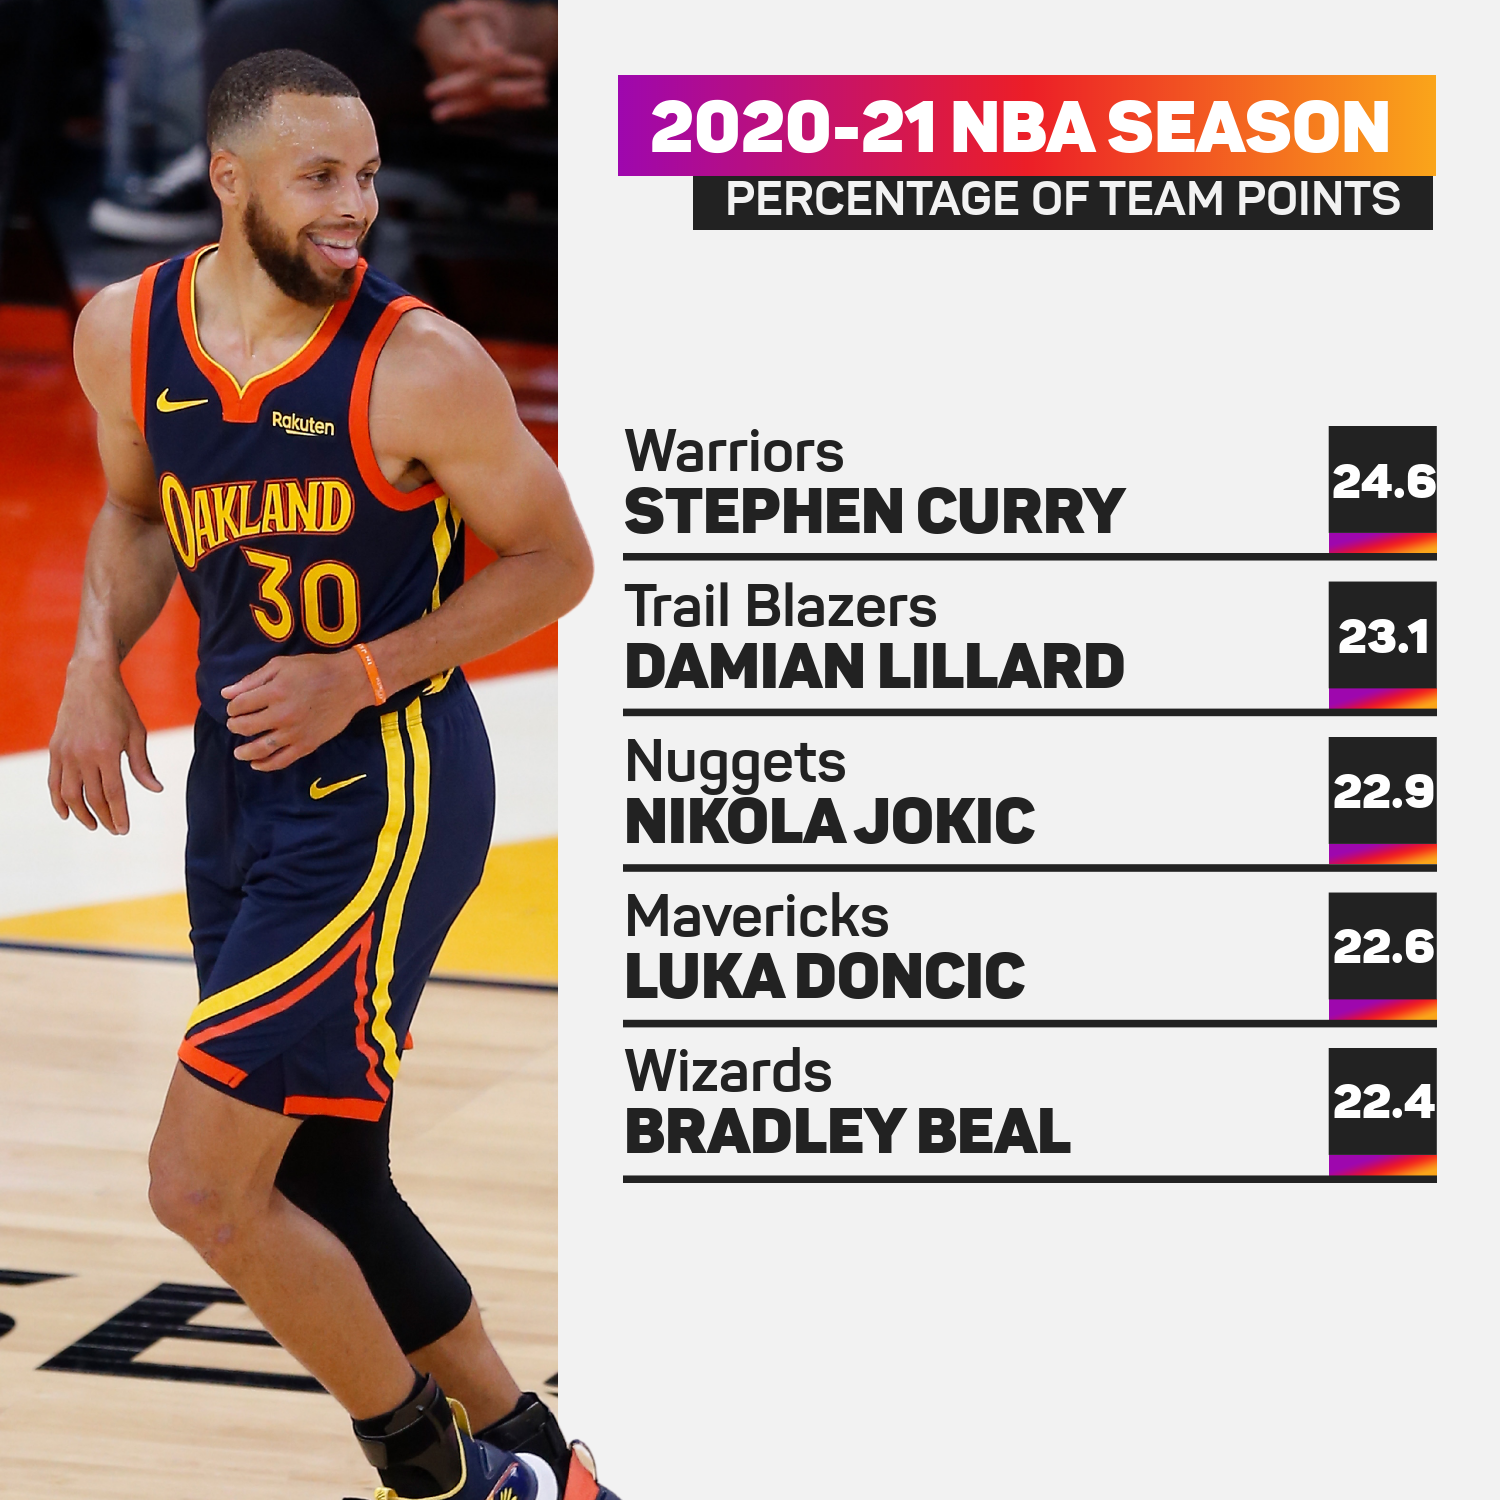 Stephen Curry was the Warriors' main man last year